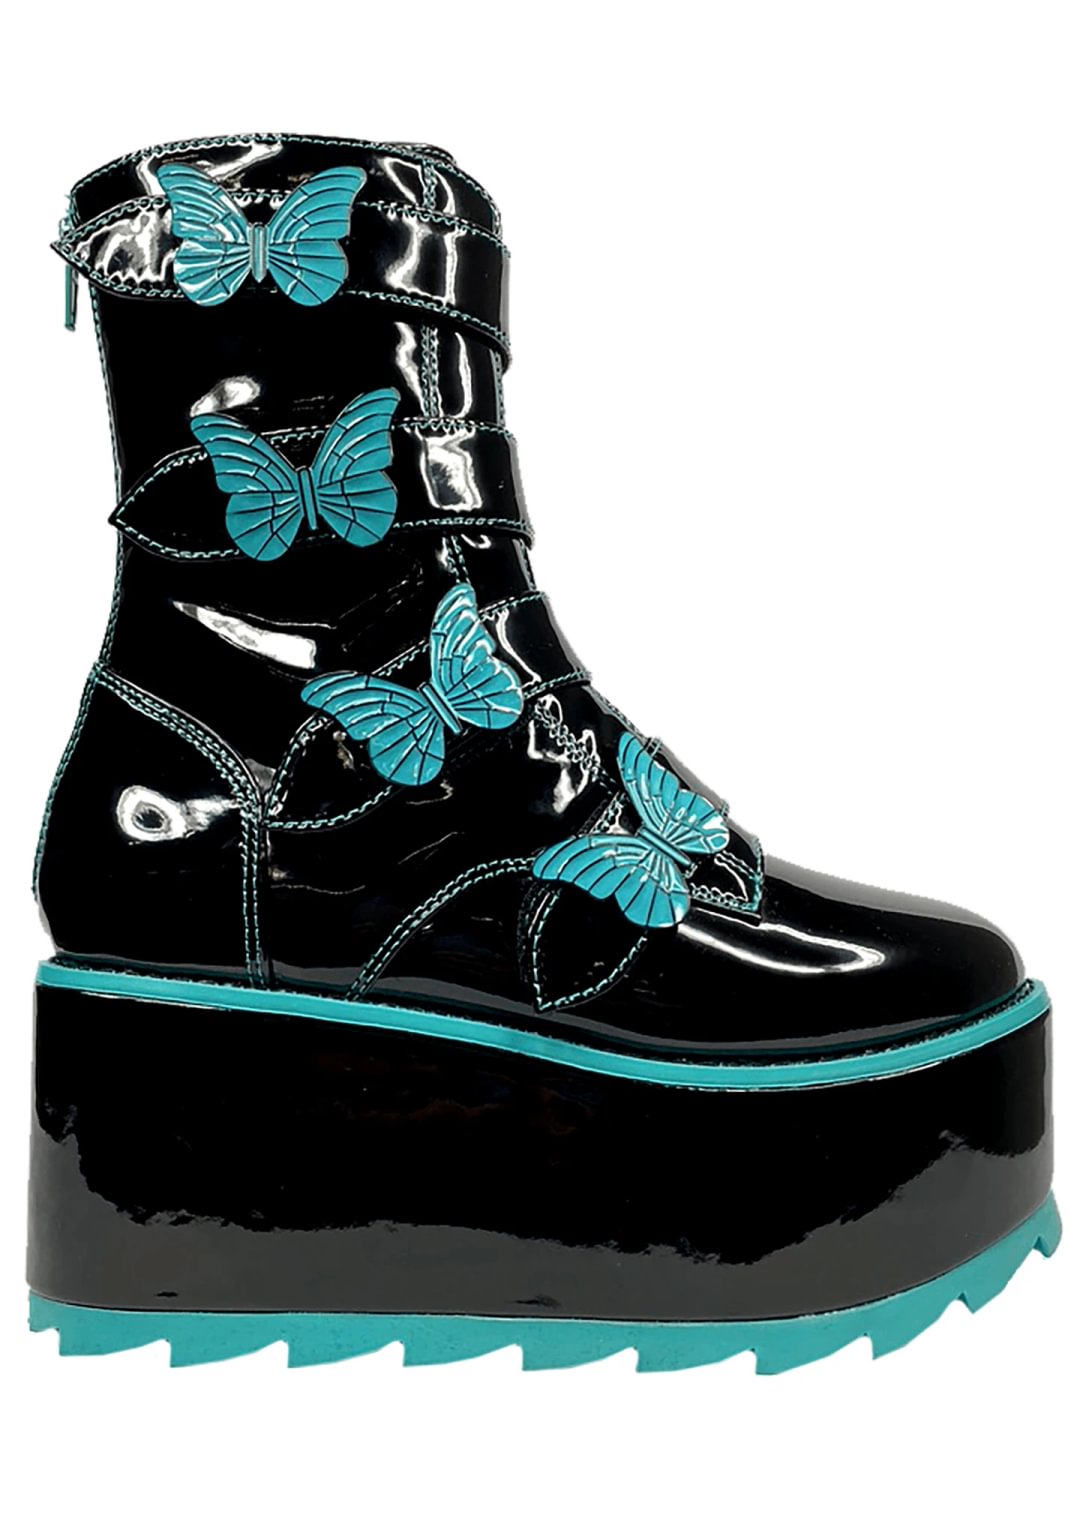 Karma Butterfly Platform Boots in Black Teal